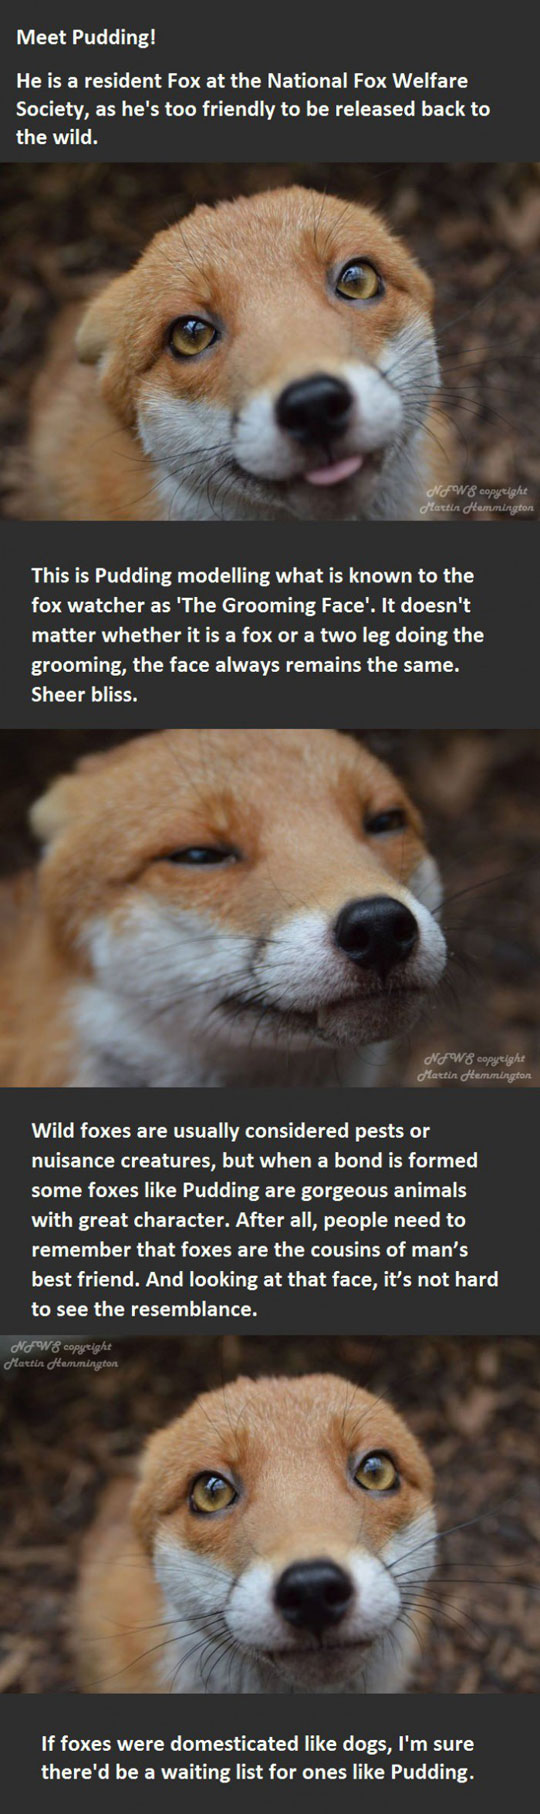 Foxes Are Just Misunderstood Creatures